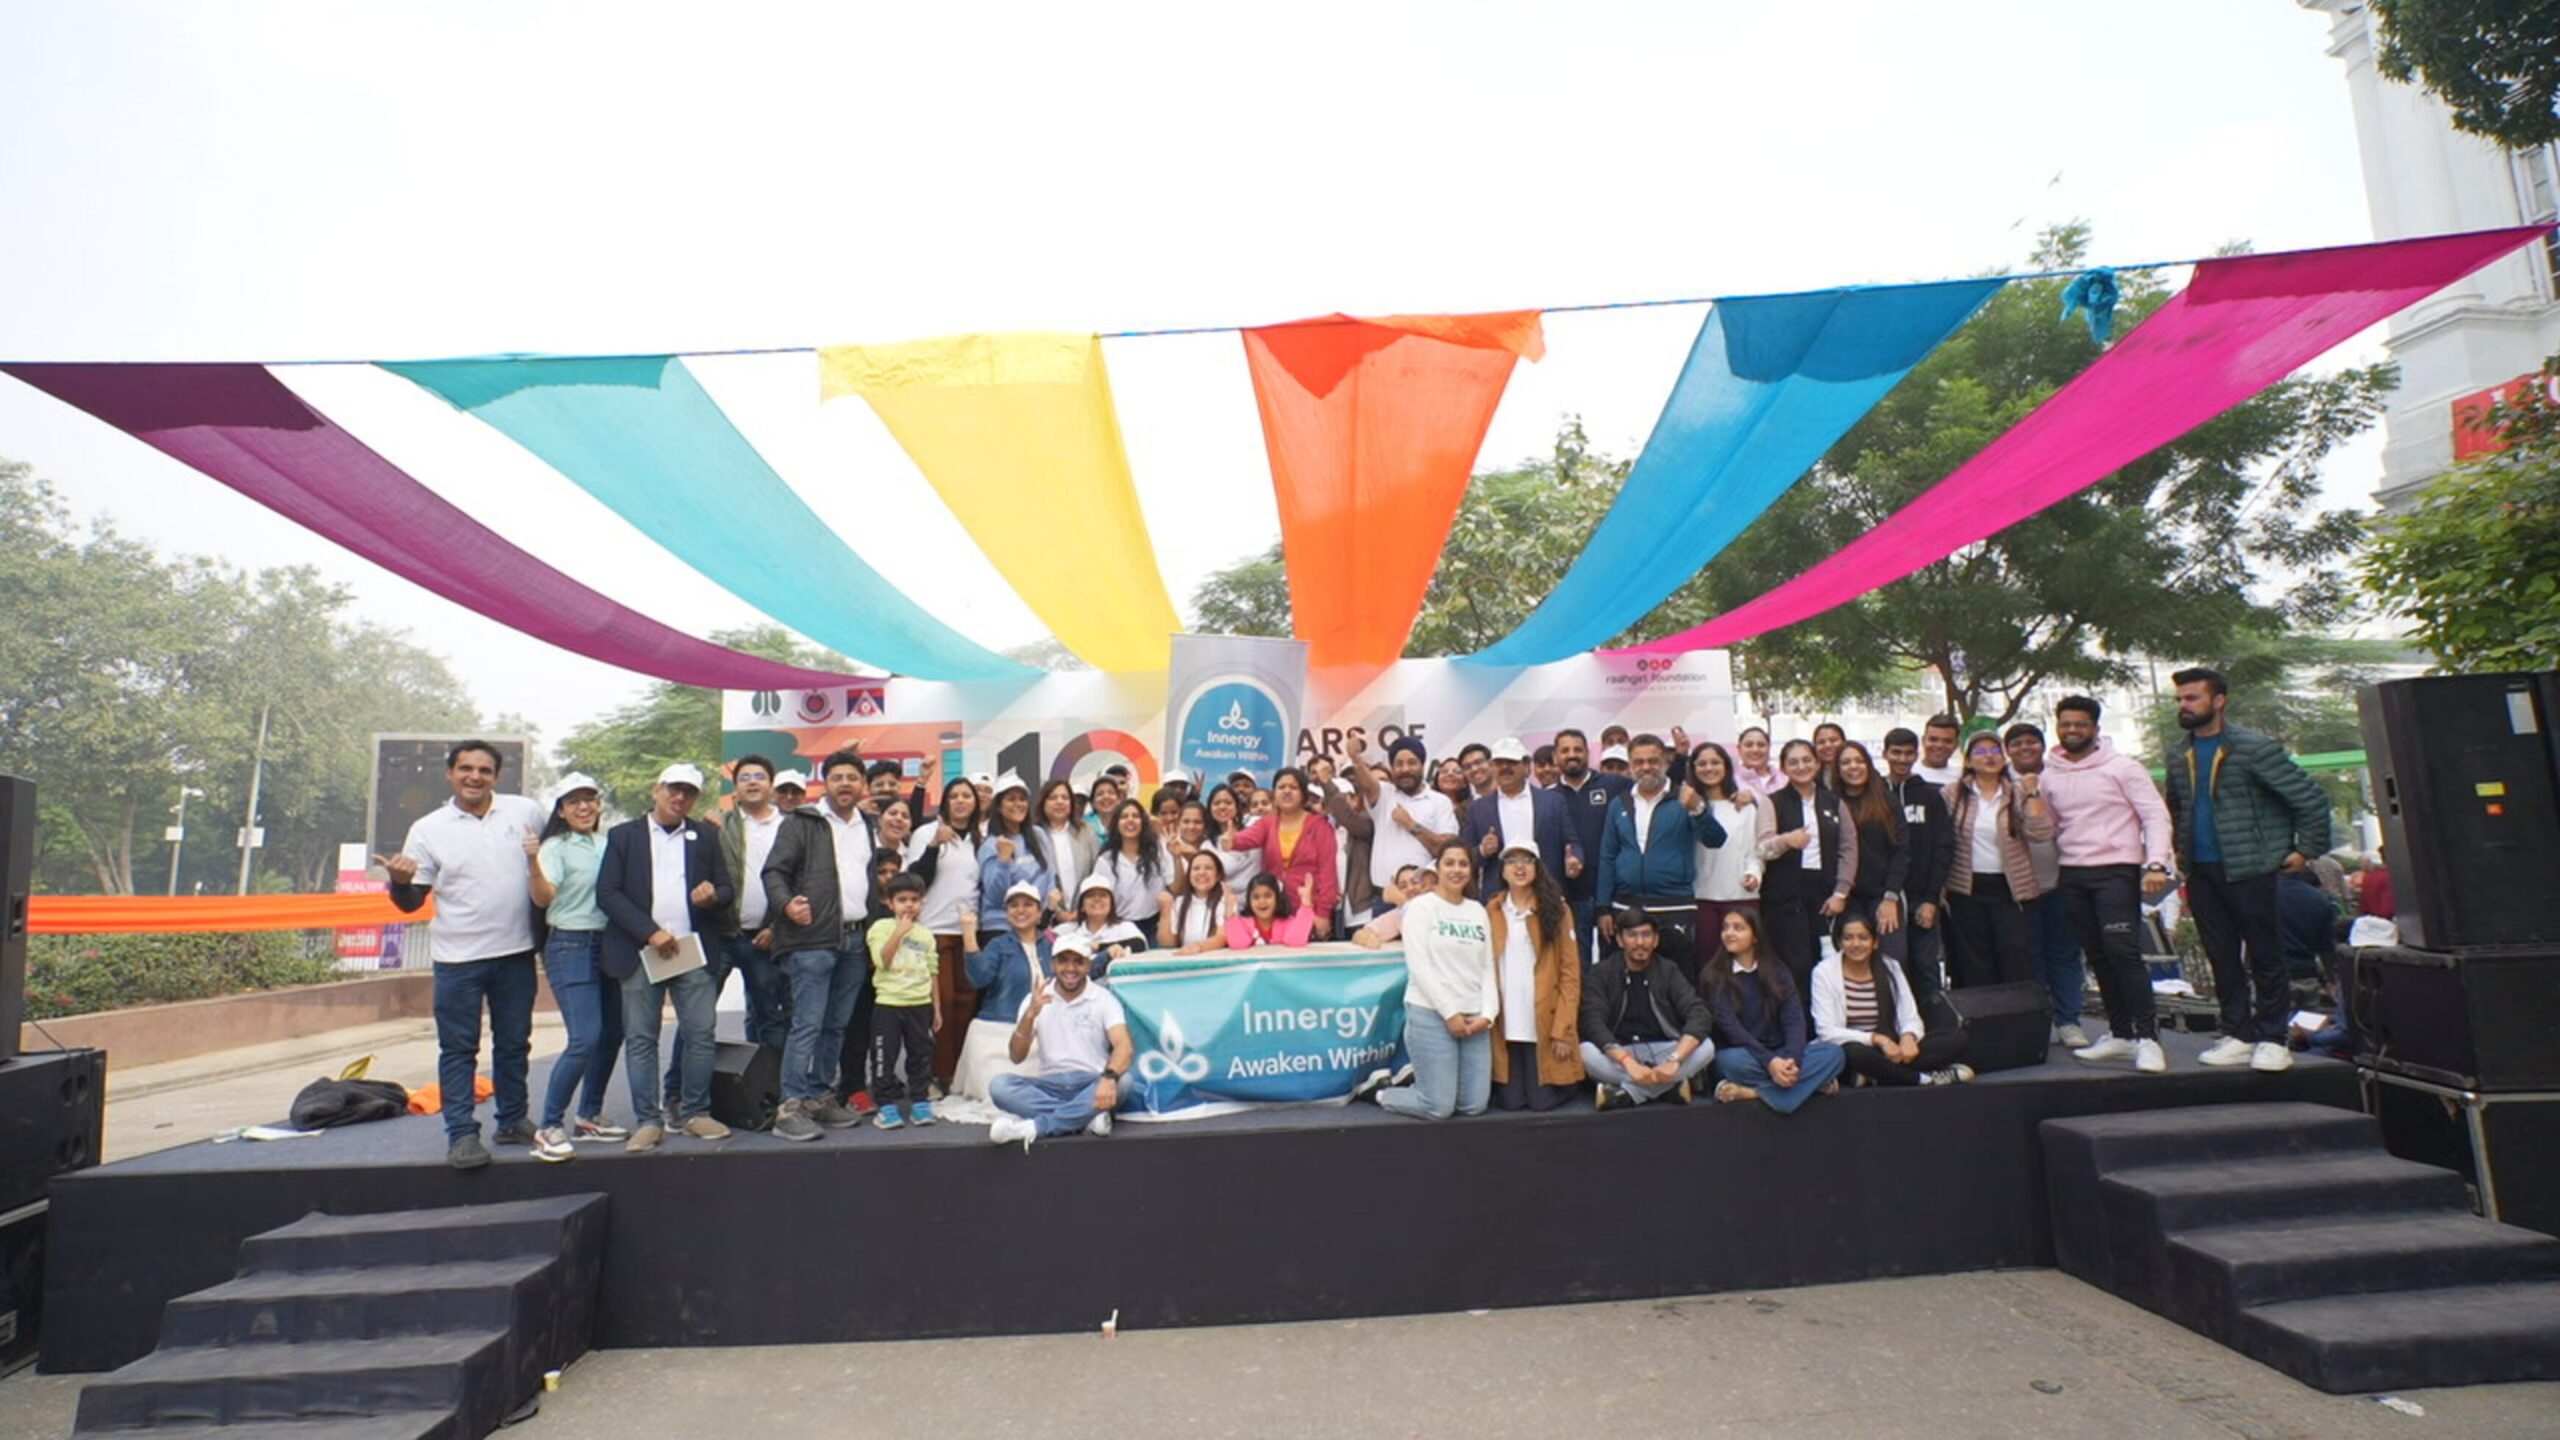 India’s First Holistic Wellness App, Innergy, Takes Center Stage at Raahigiri Day in Delhi